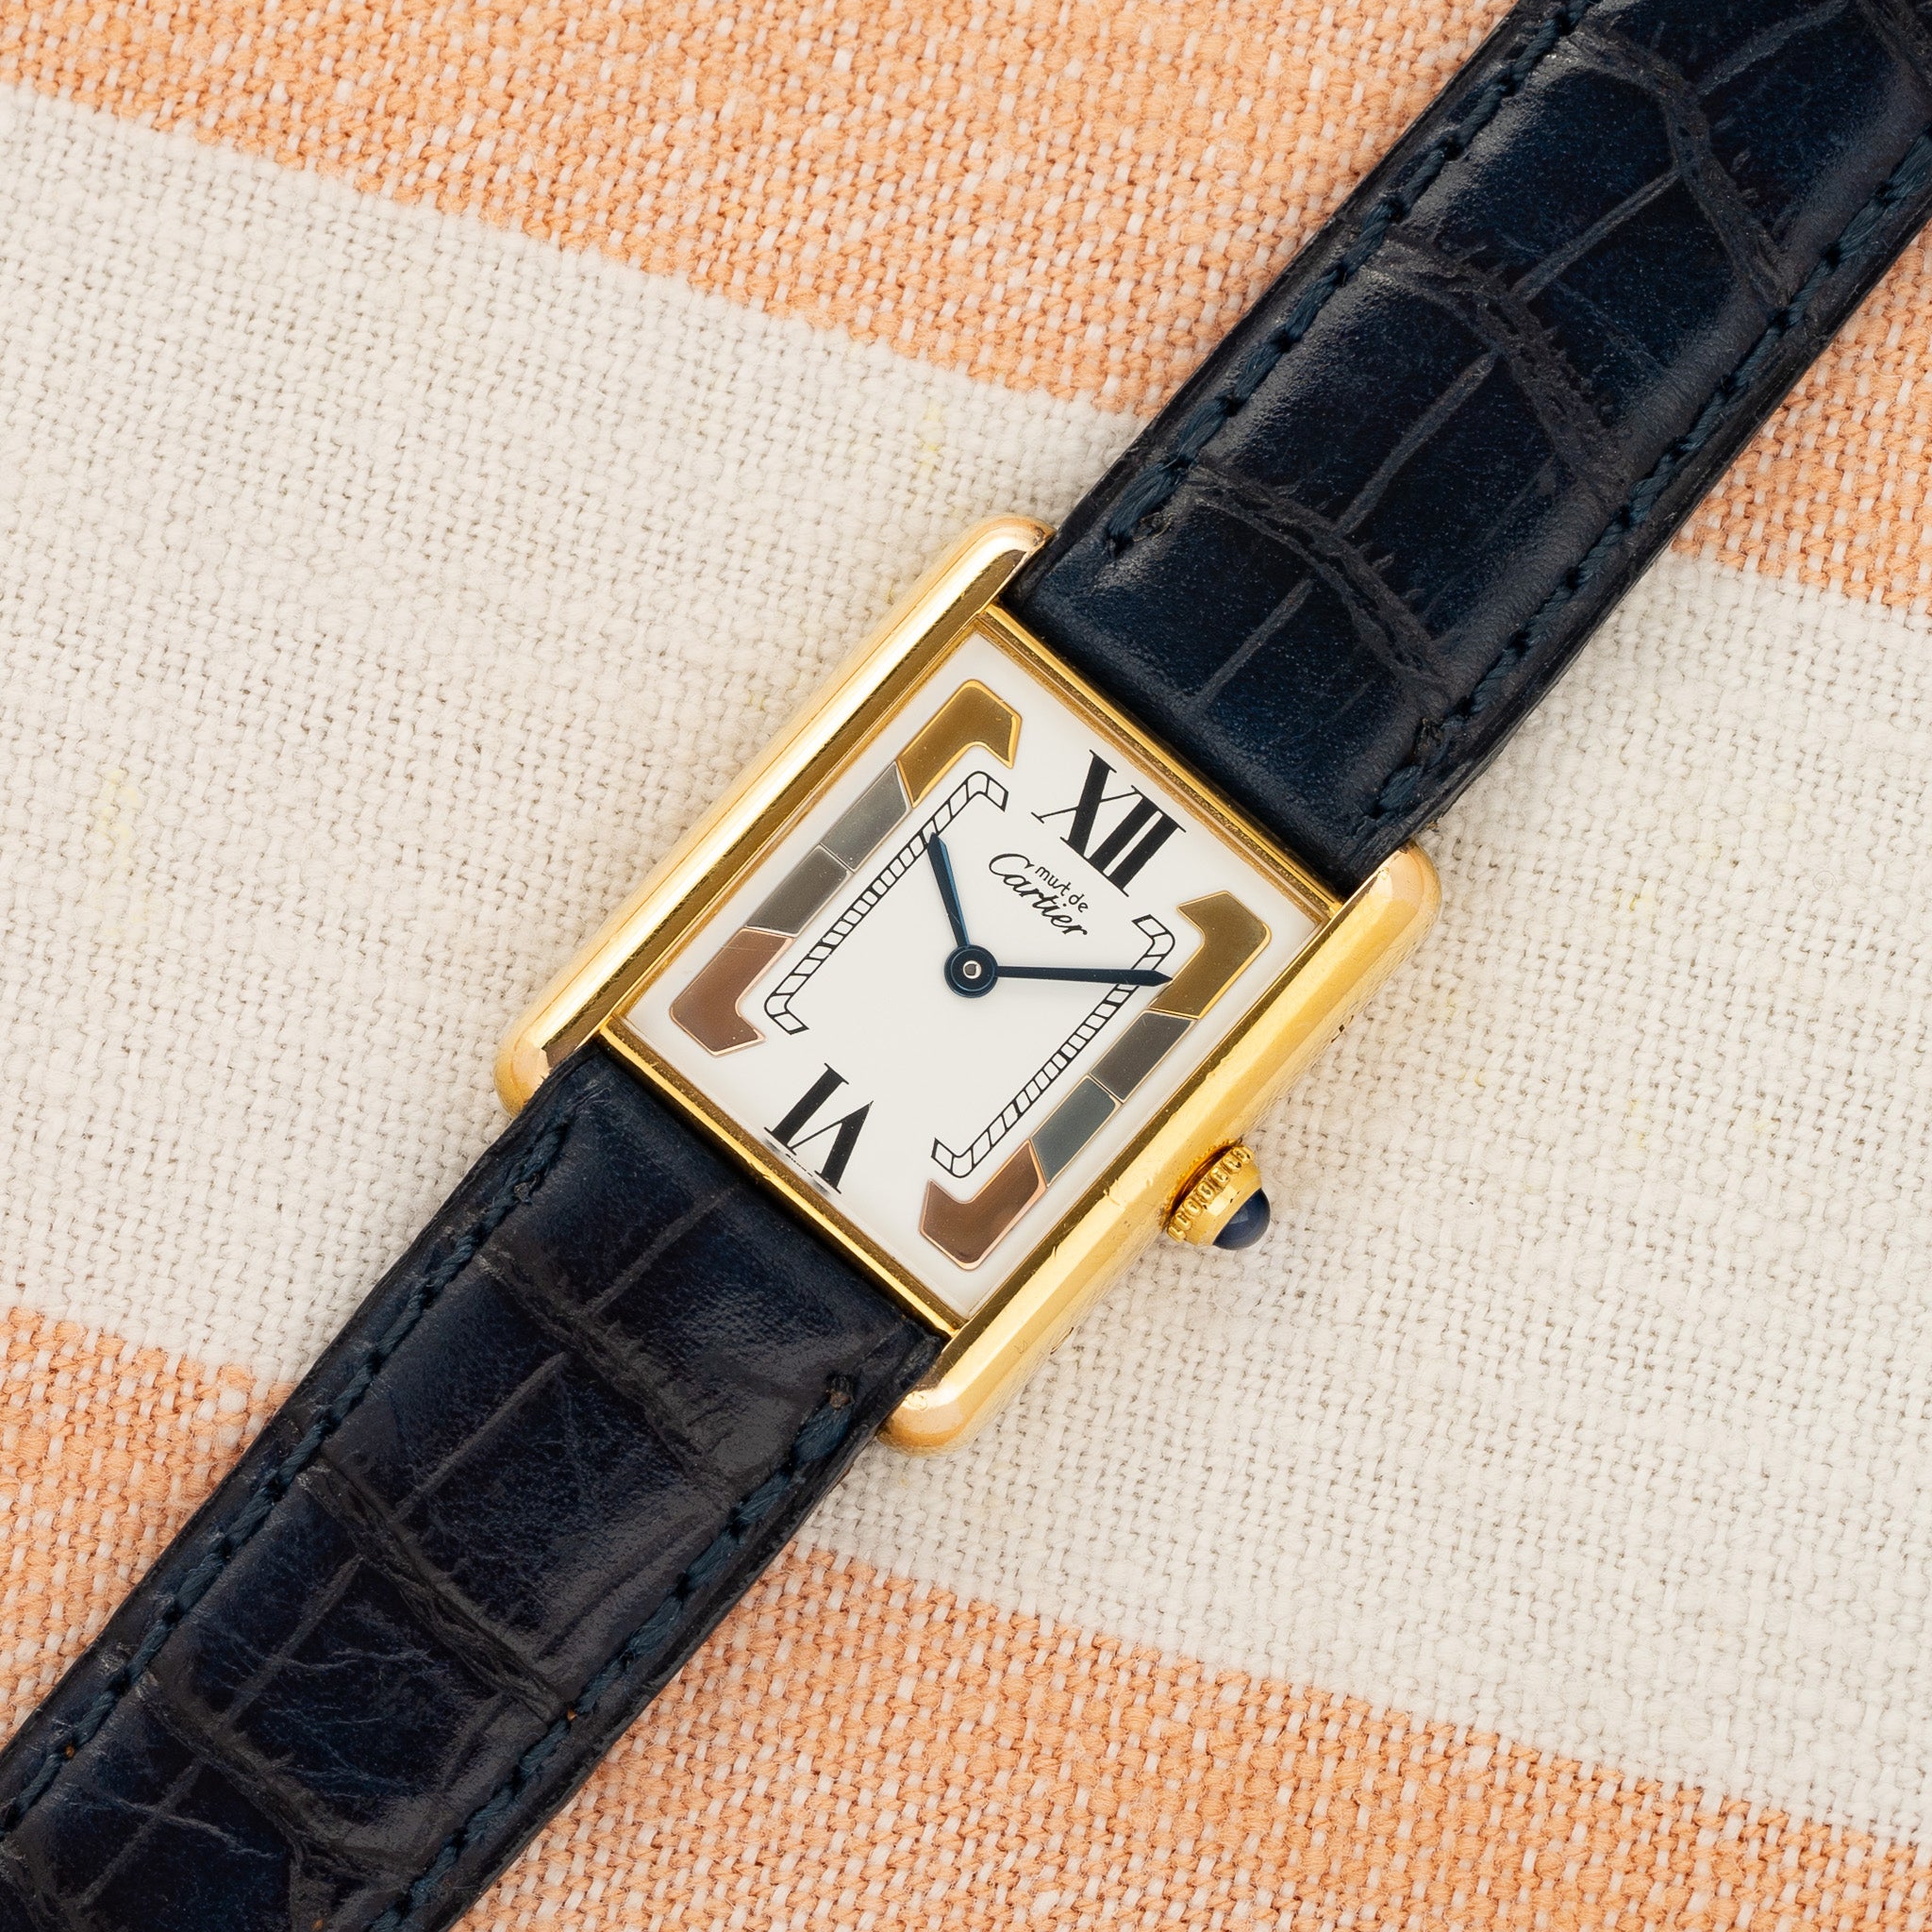 Cartier Tank Must watch: About the watch, why I bought it and Paris luxury  shopping experience - YouTube